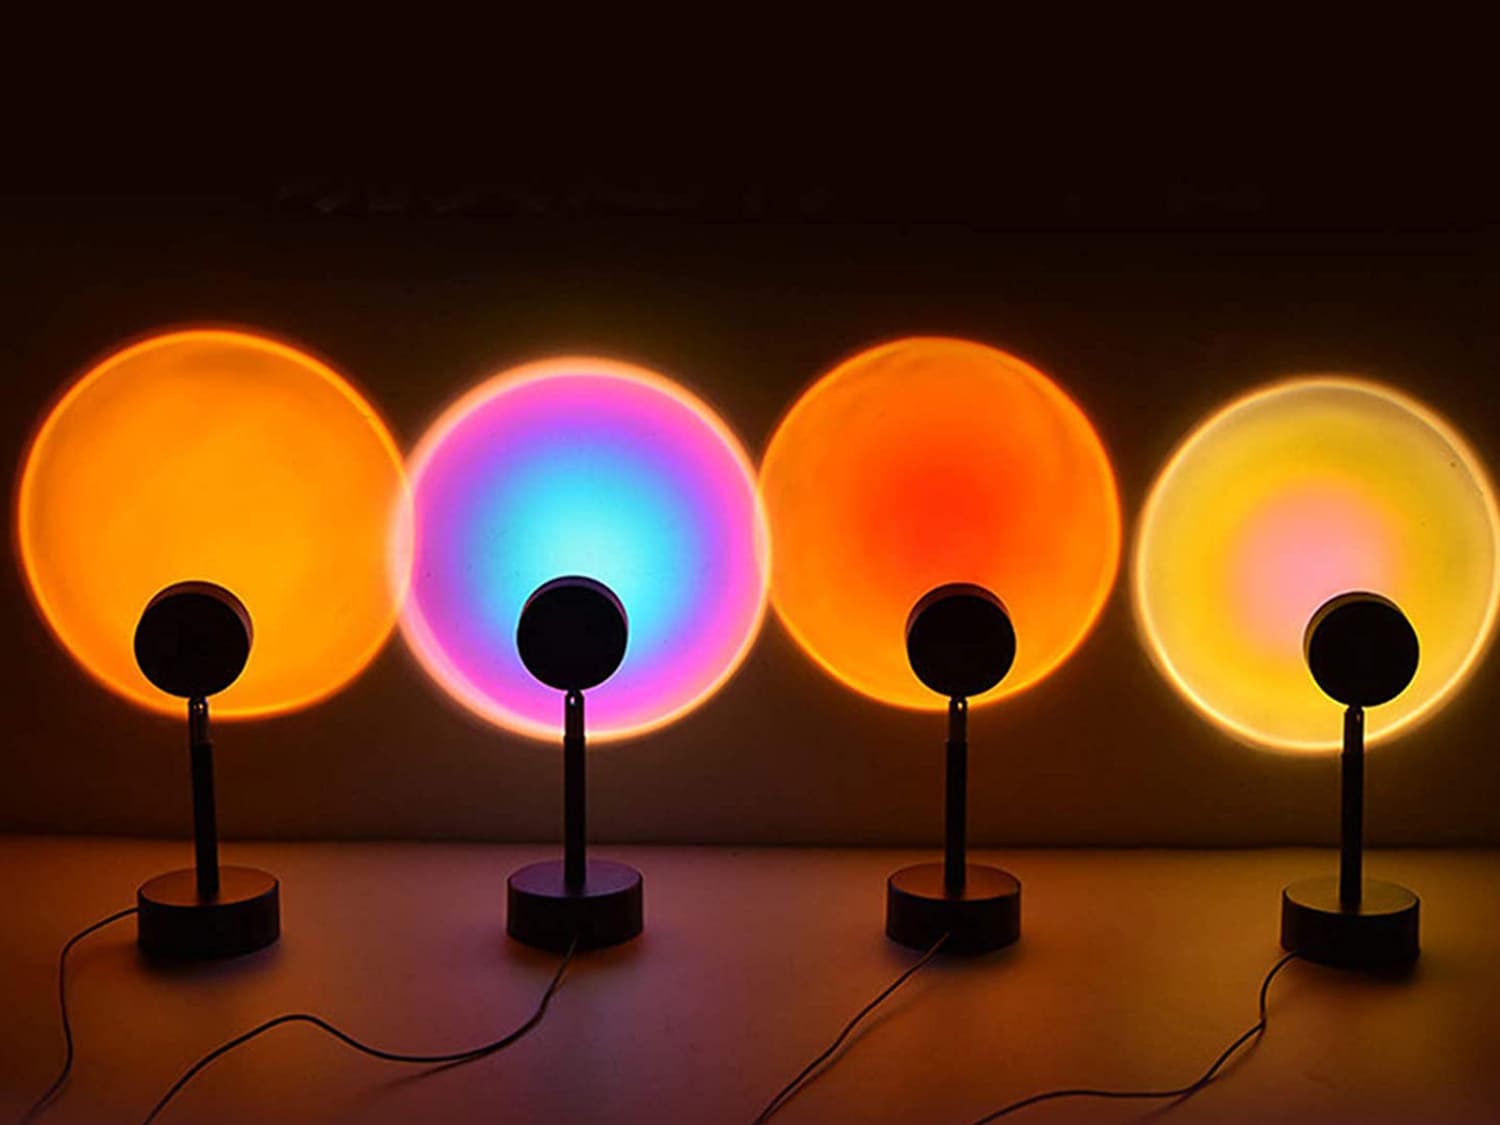 66mm Films for Night Light 5 Different Color Lamp Films for Sunset Lamp Changeable Colors for Home Party Living Room Bedroom Decor 